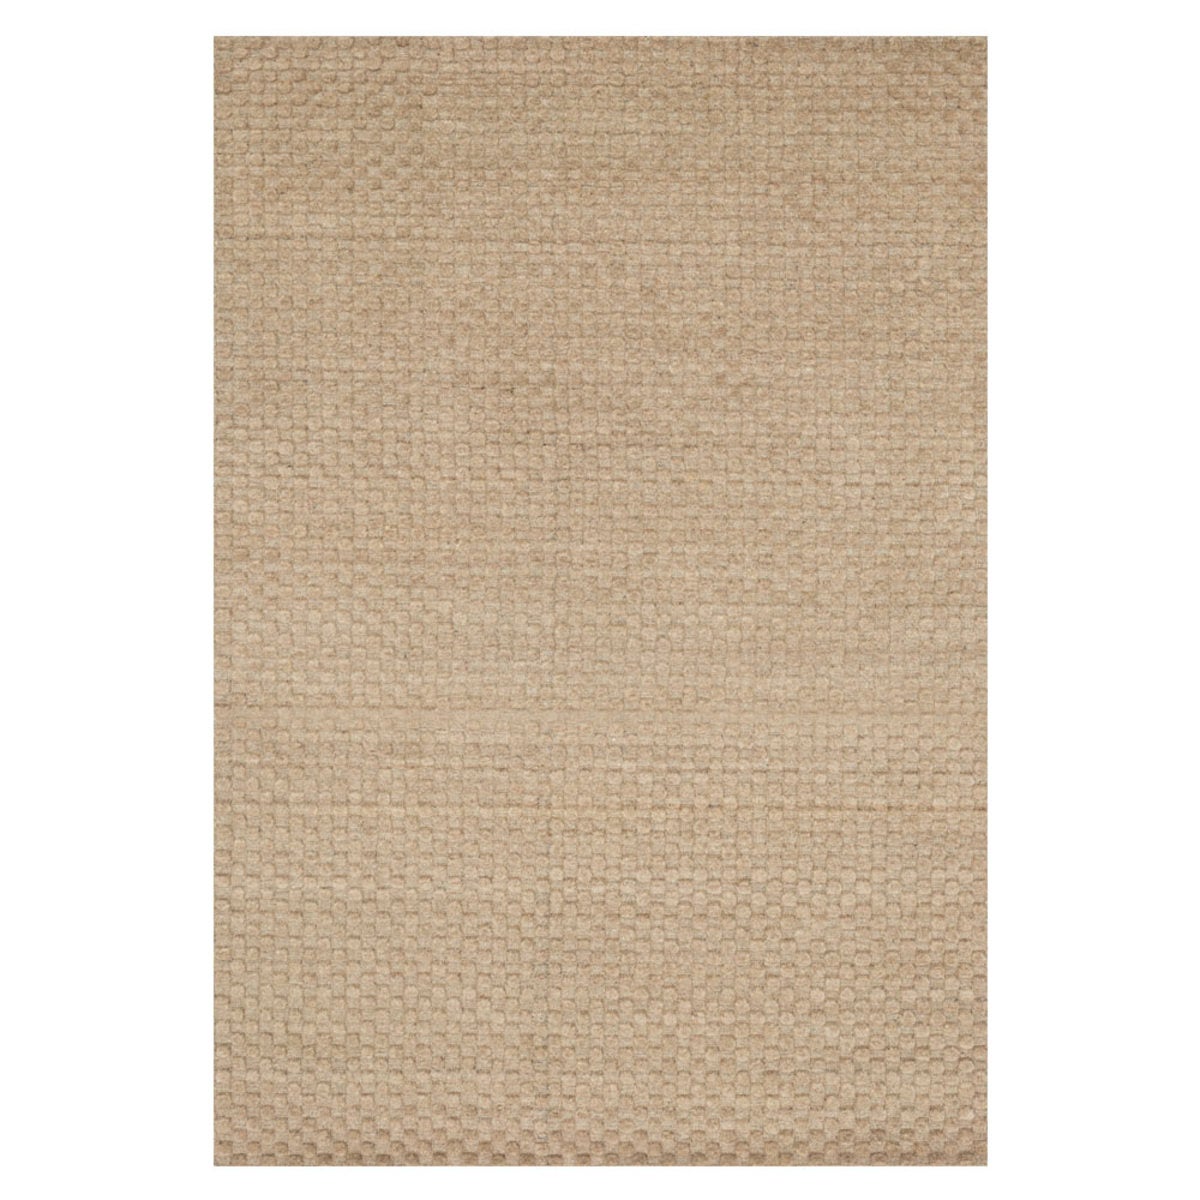 Loloi Hadley Dotted Rug in Dune - 5' x 7'6" - Dune